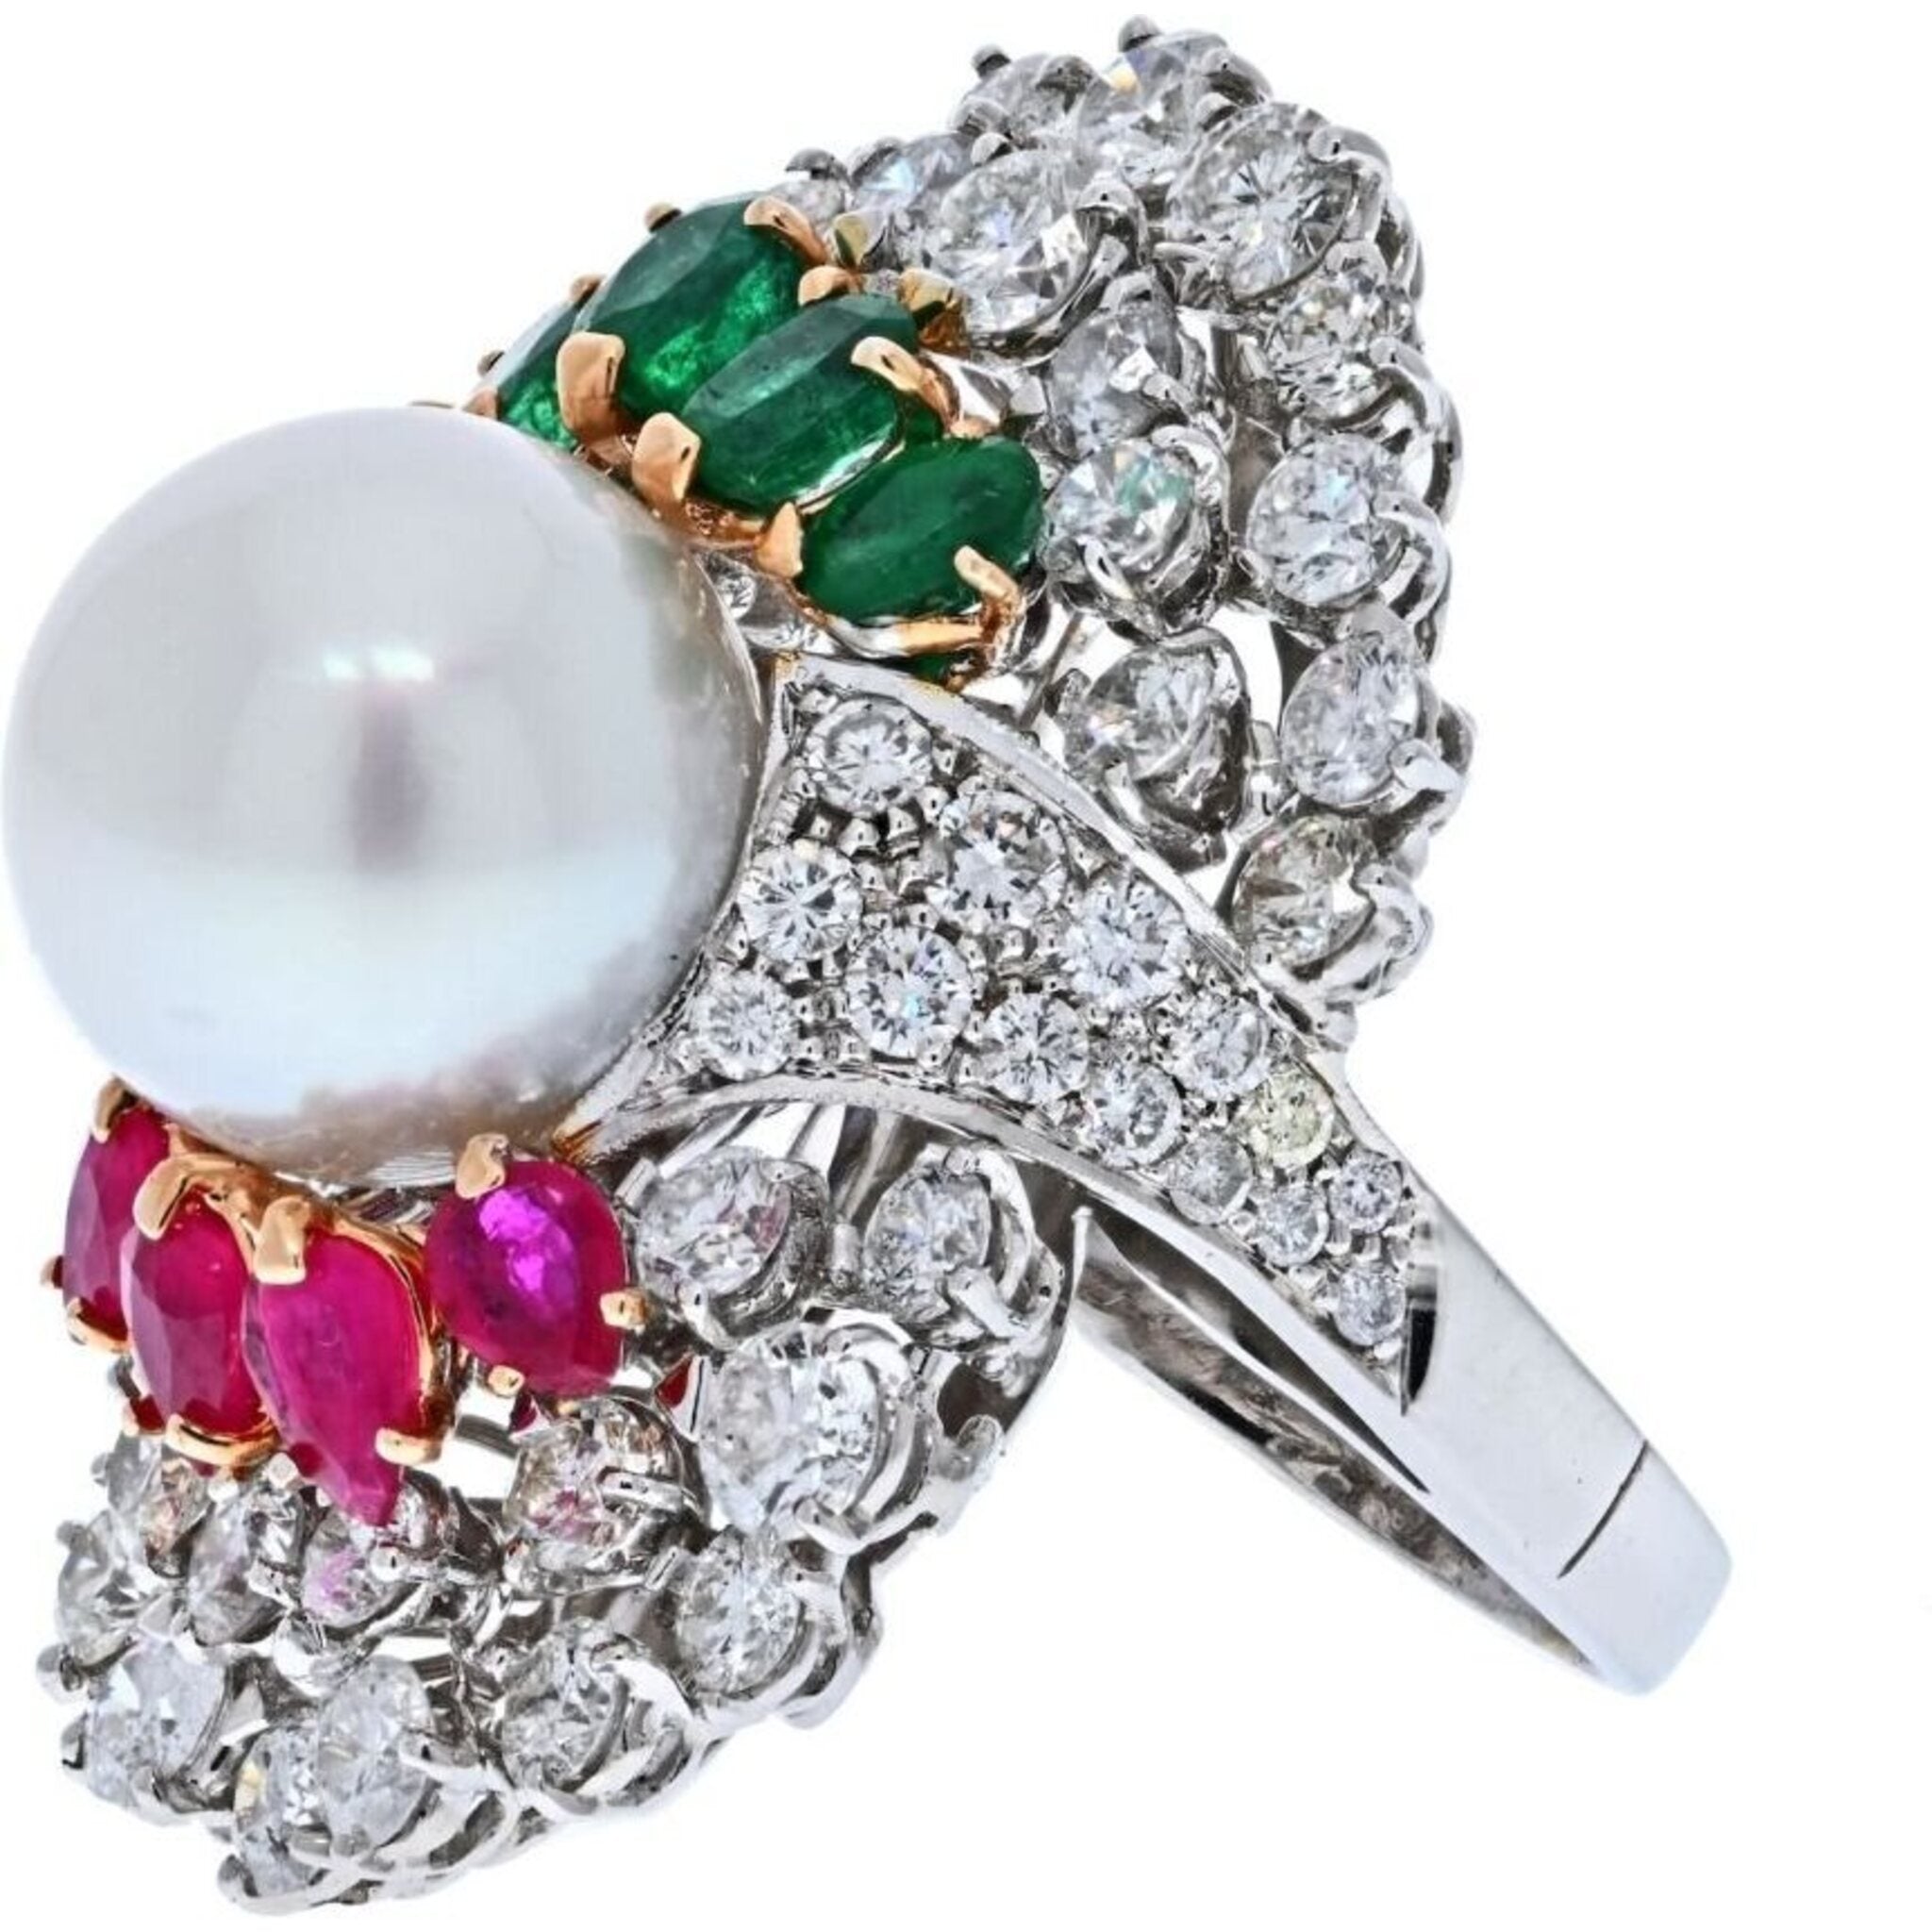 14K White Gold Diamond, Ruby, Emerald And South Sea Pearl Ring